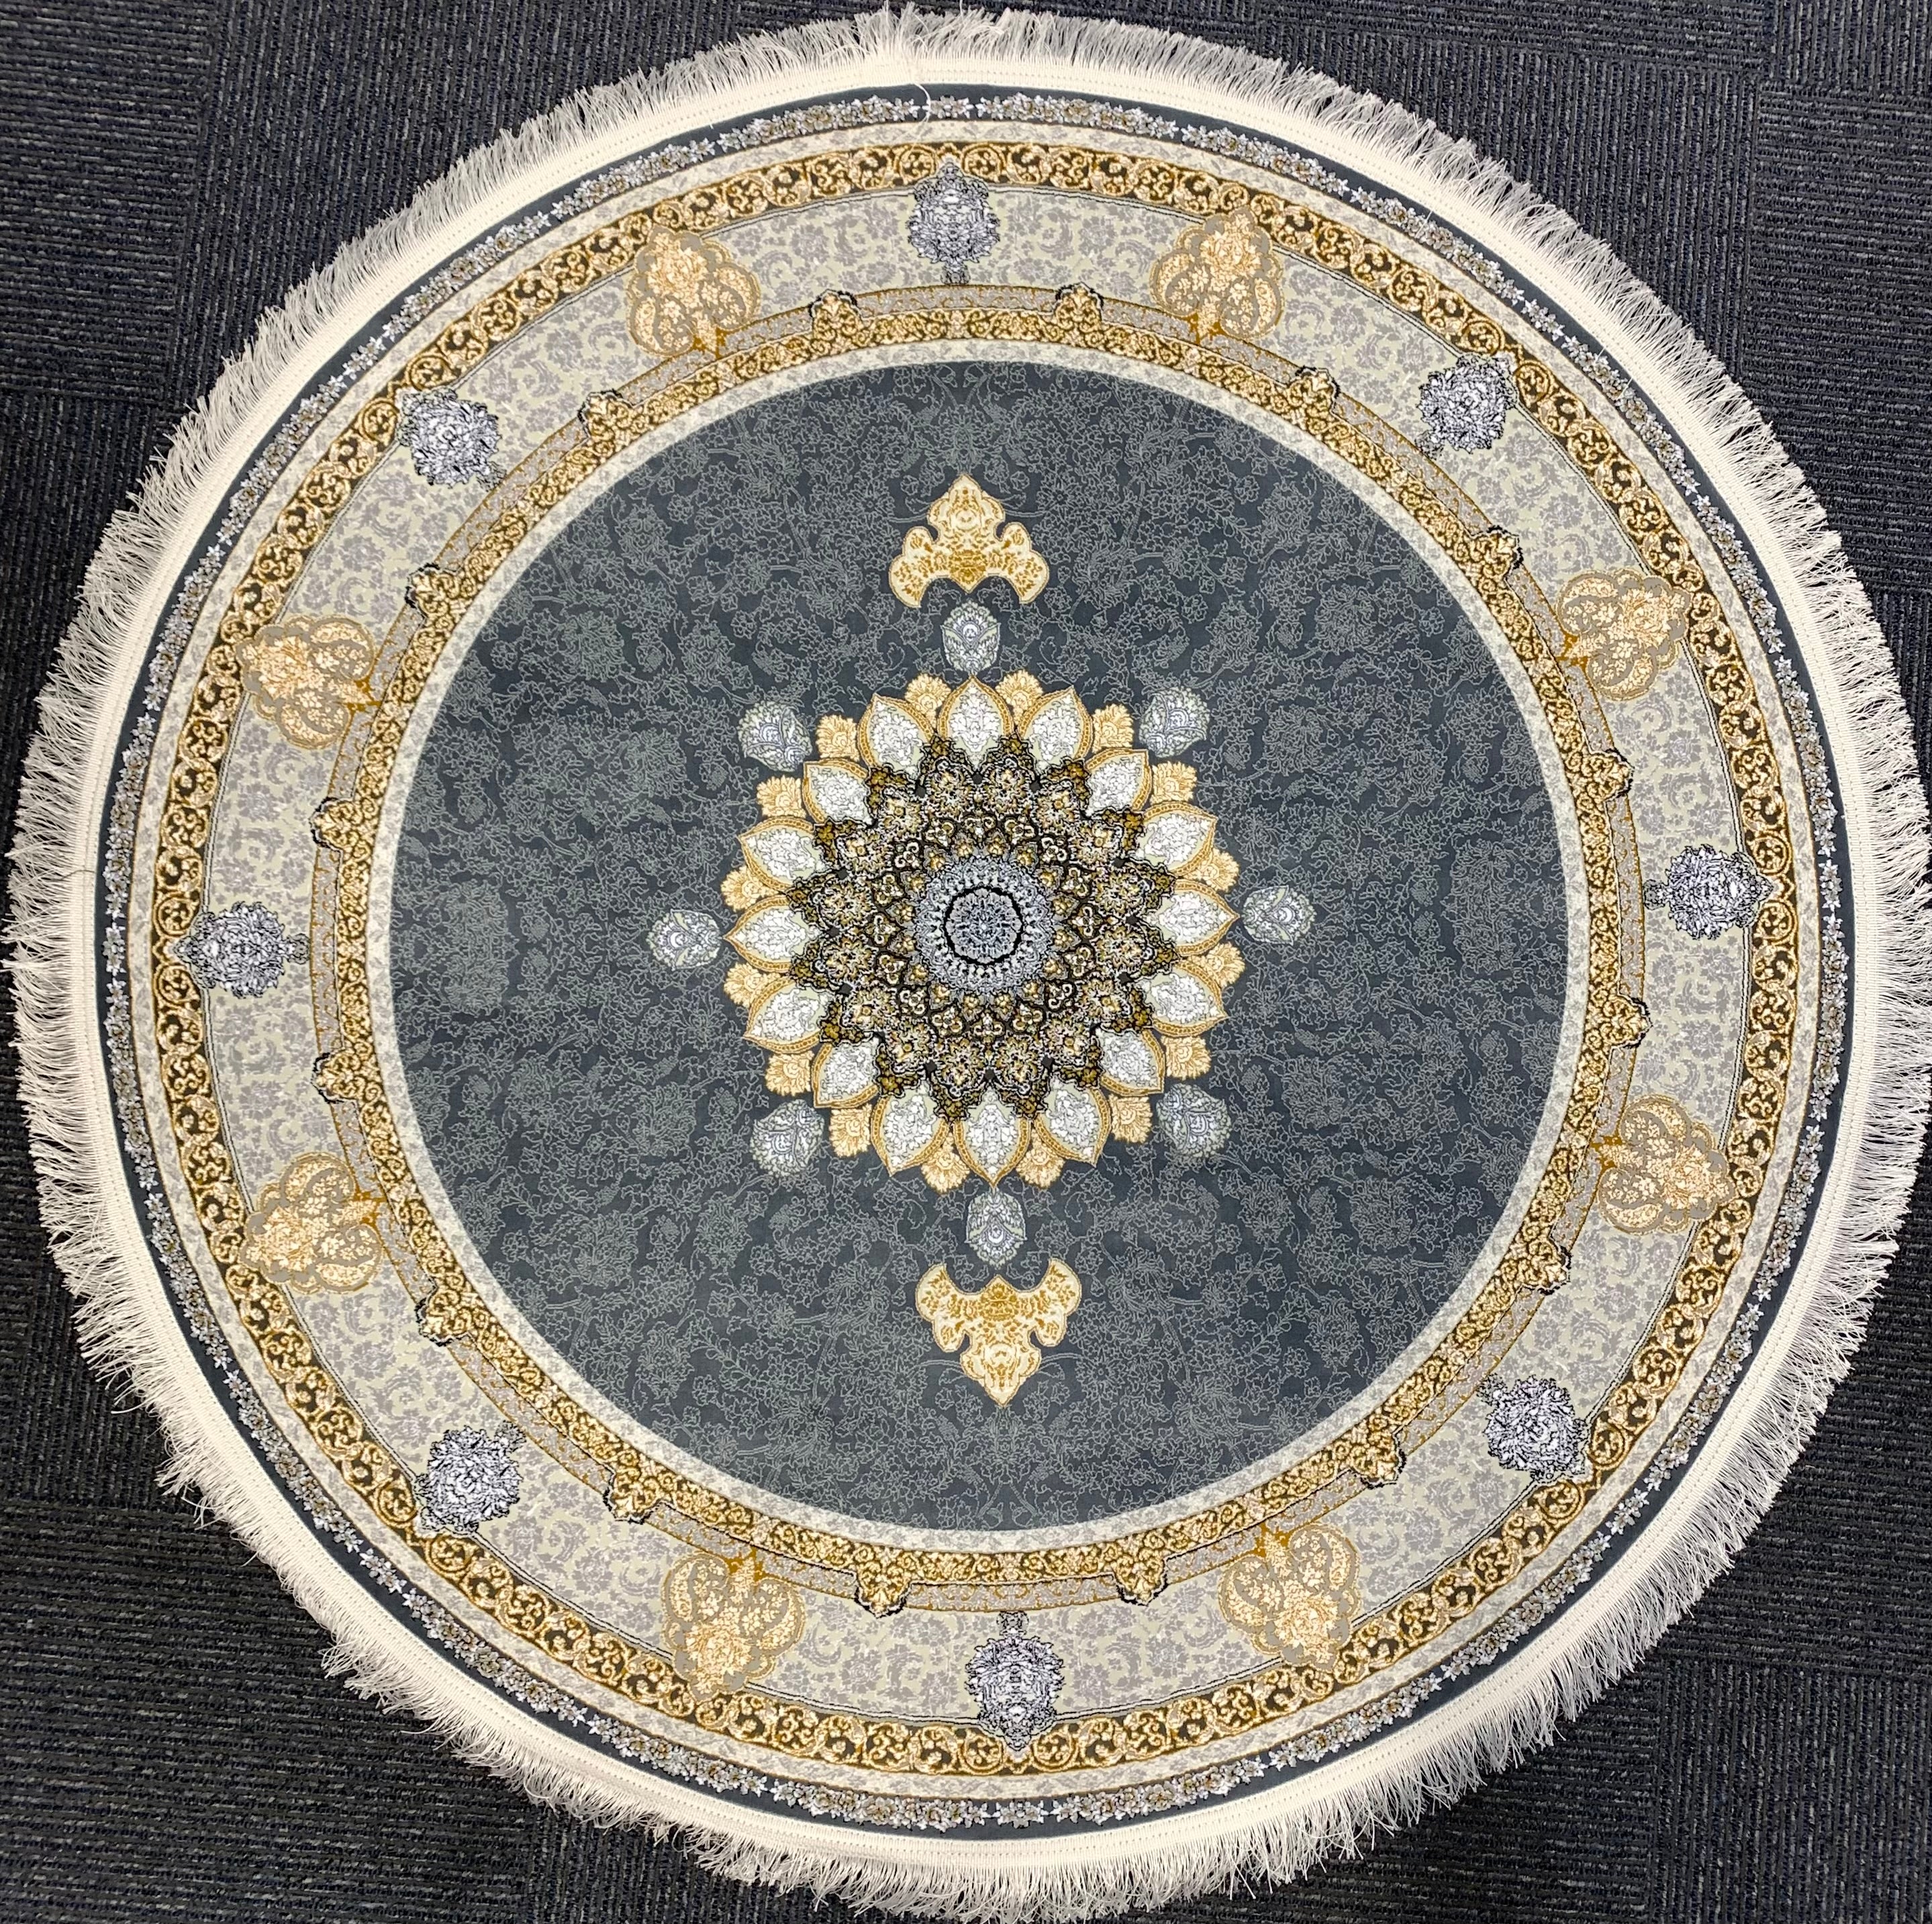 Rozhan Dolphin Round Rug, Grey & Gold Persian Rugs